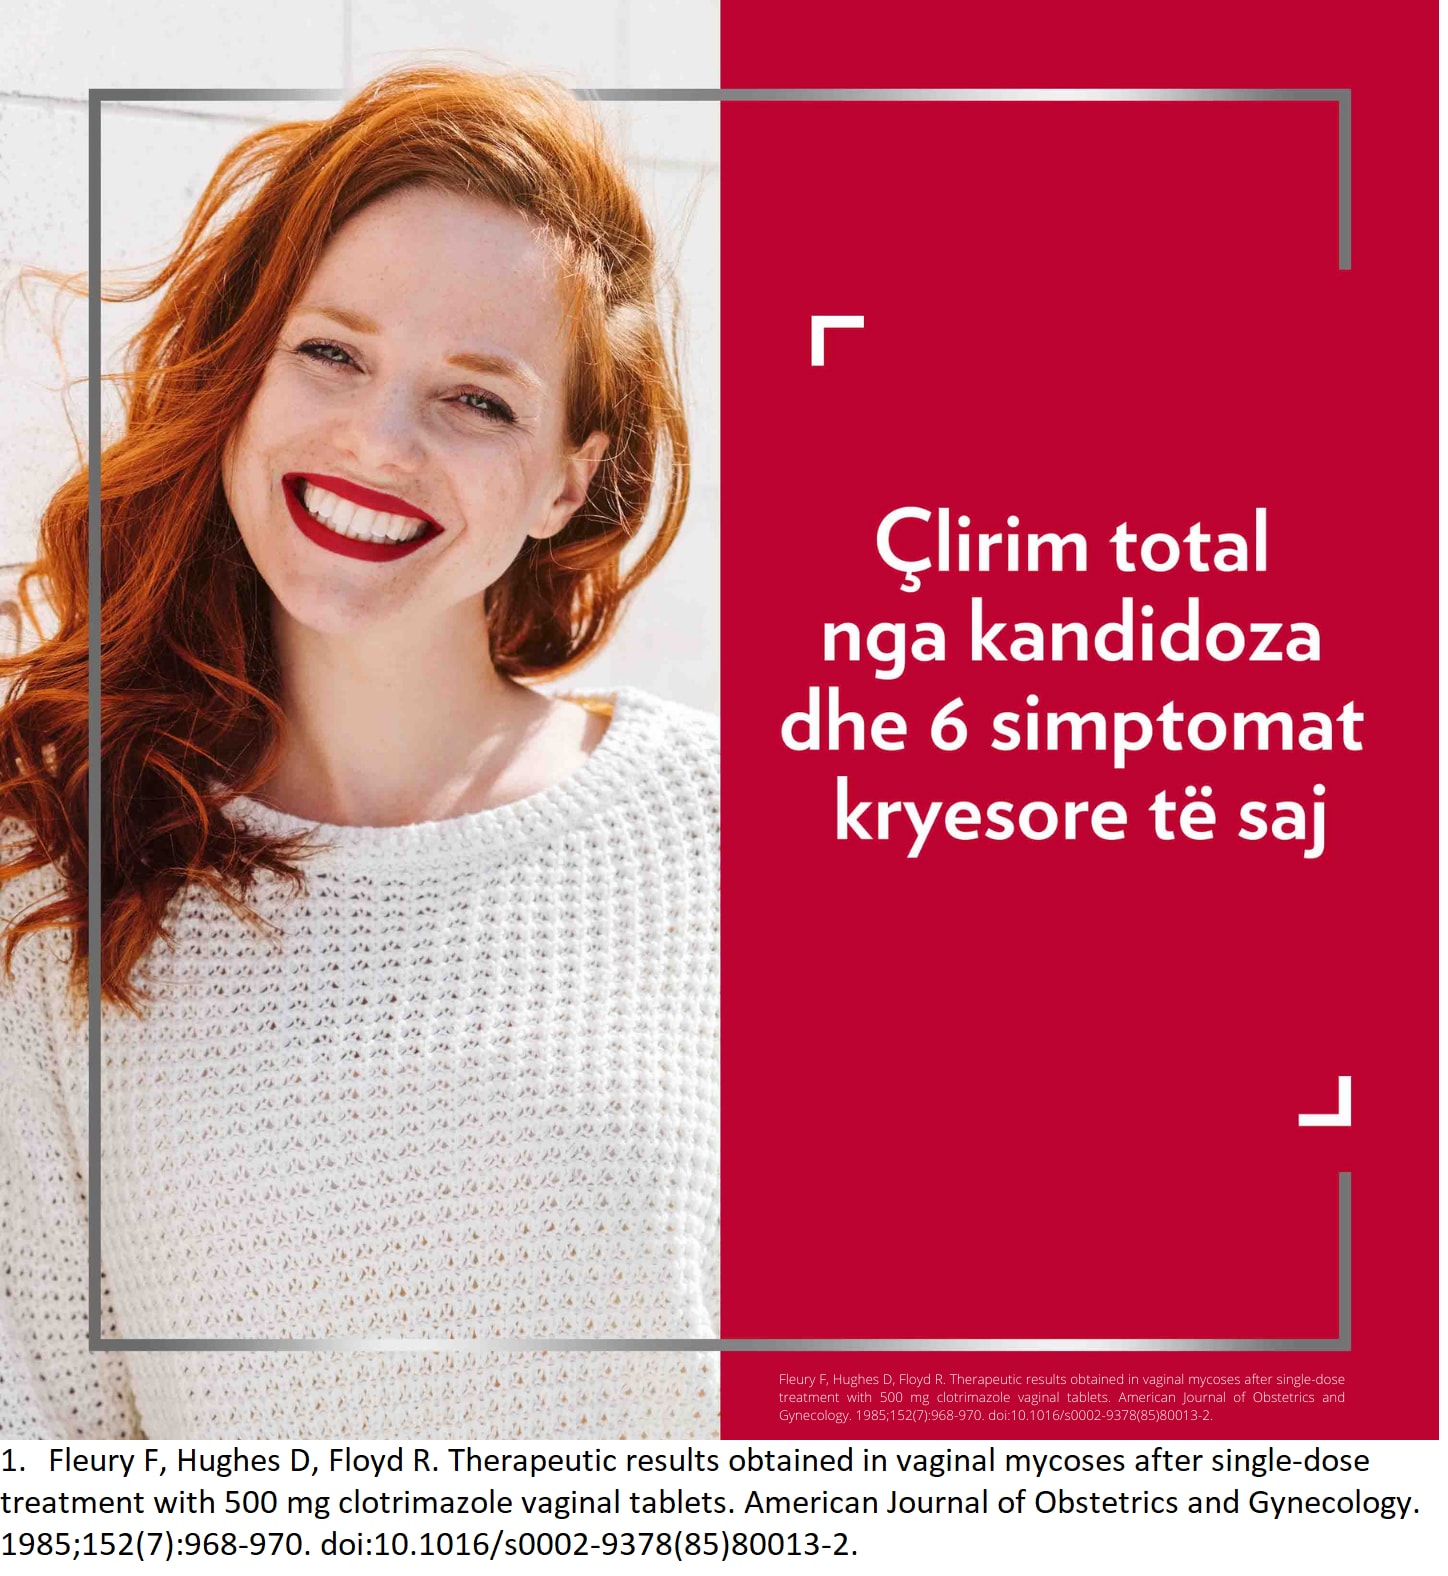 Smiling red-haired woman, with caption on the right side of picture: Effective relief from thrush and its 6 main symptoms1